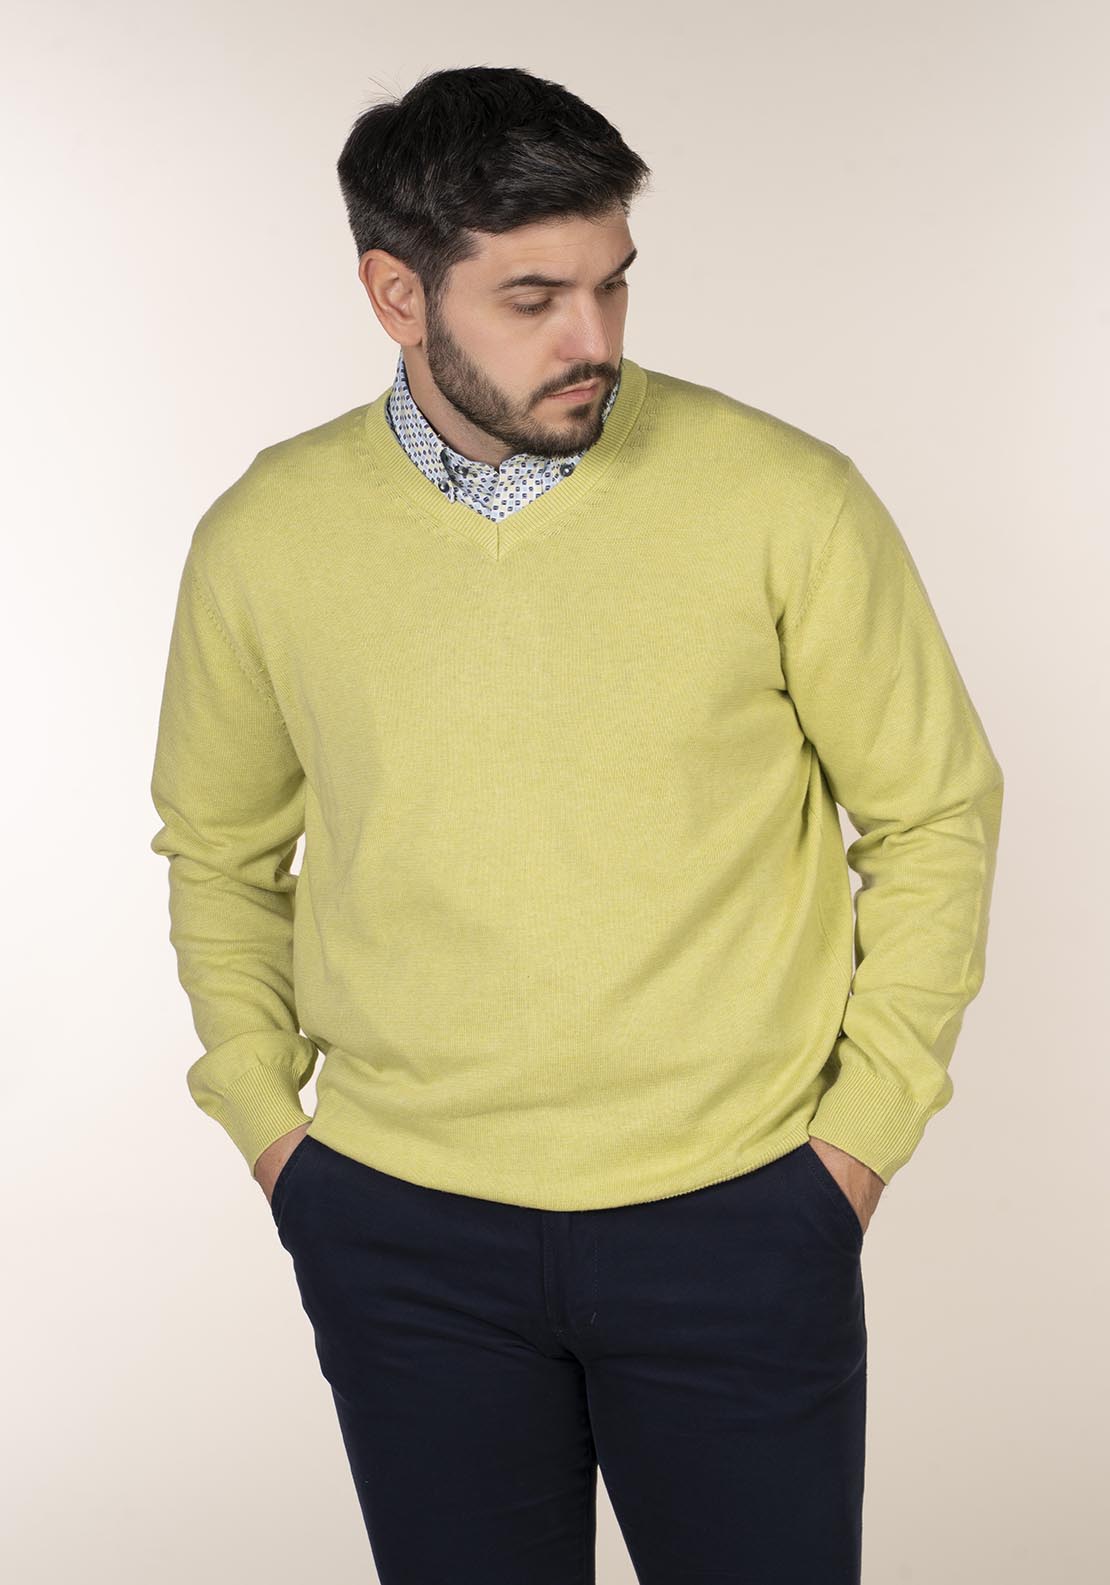 Yeats Plain Cotton V Neck Sweaters 3 Shaws Department Stores